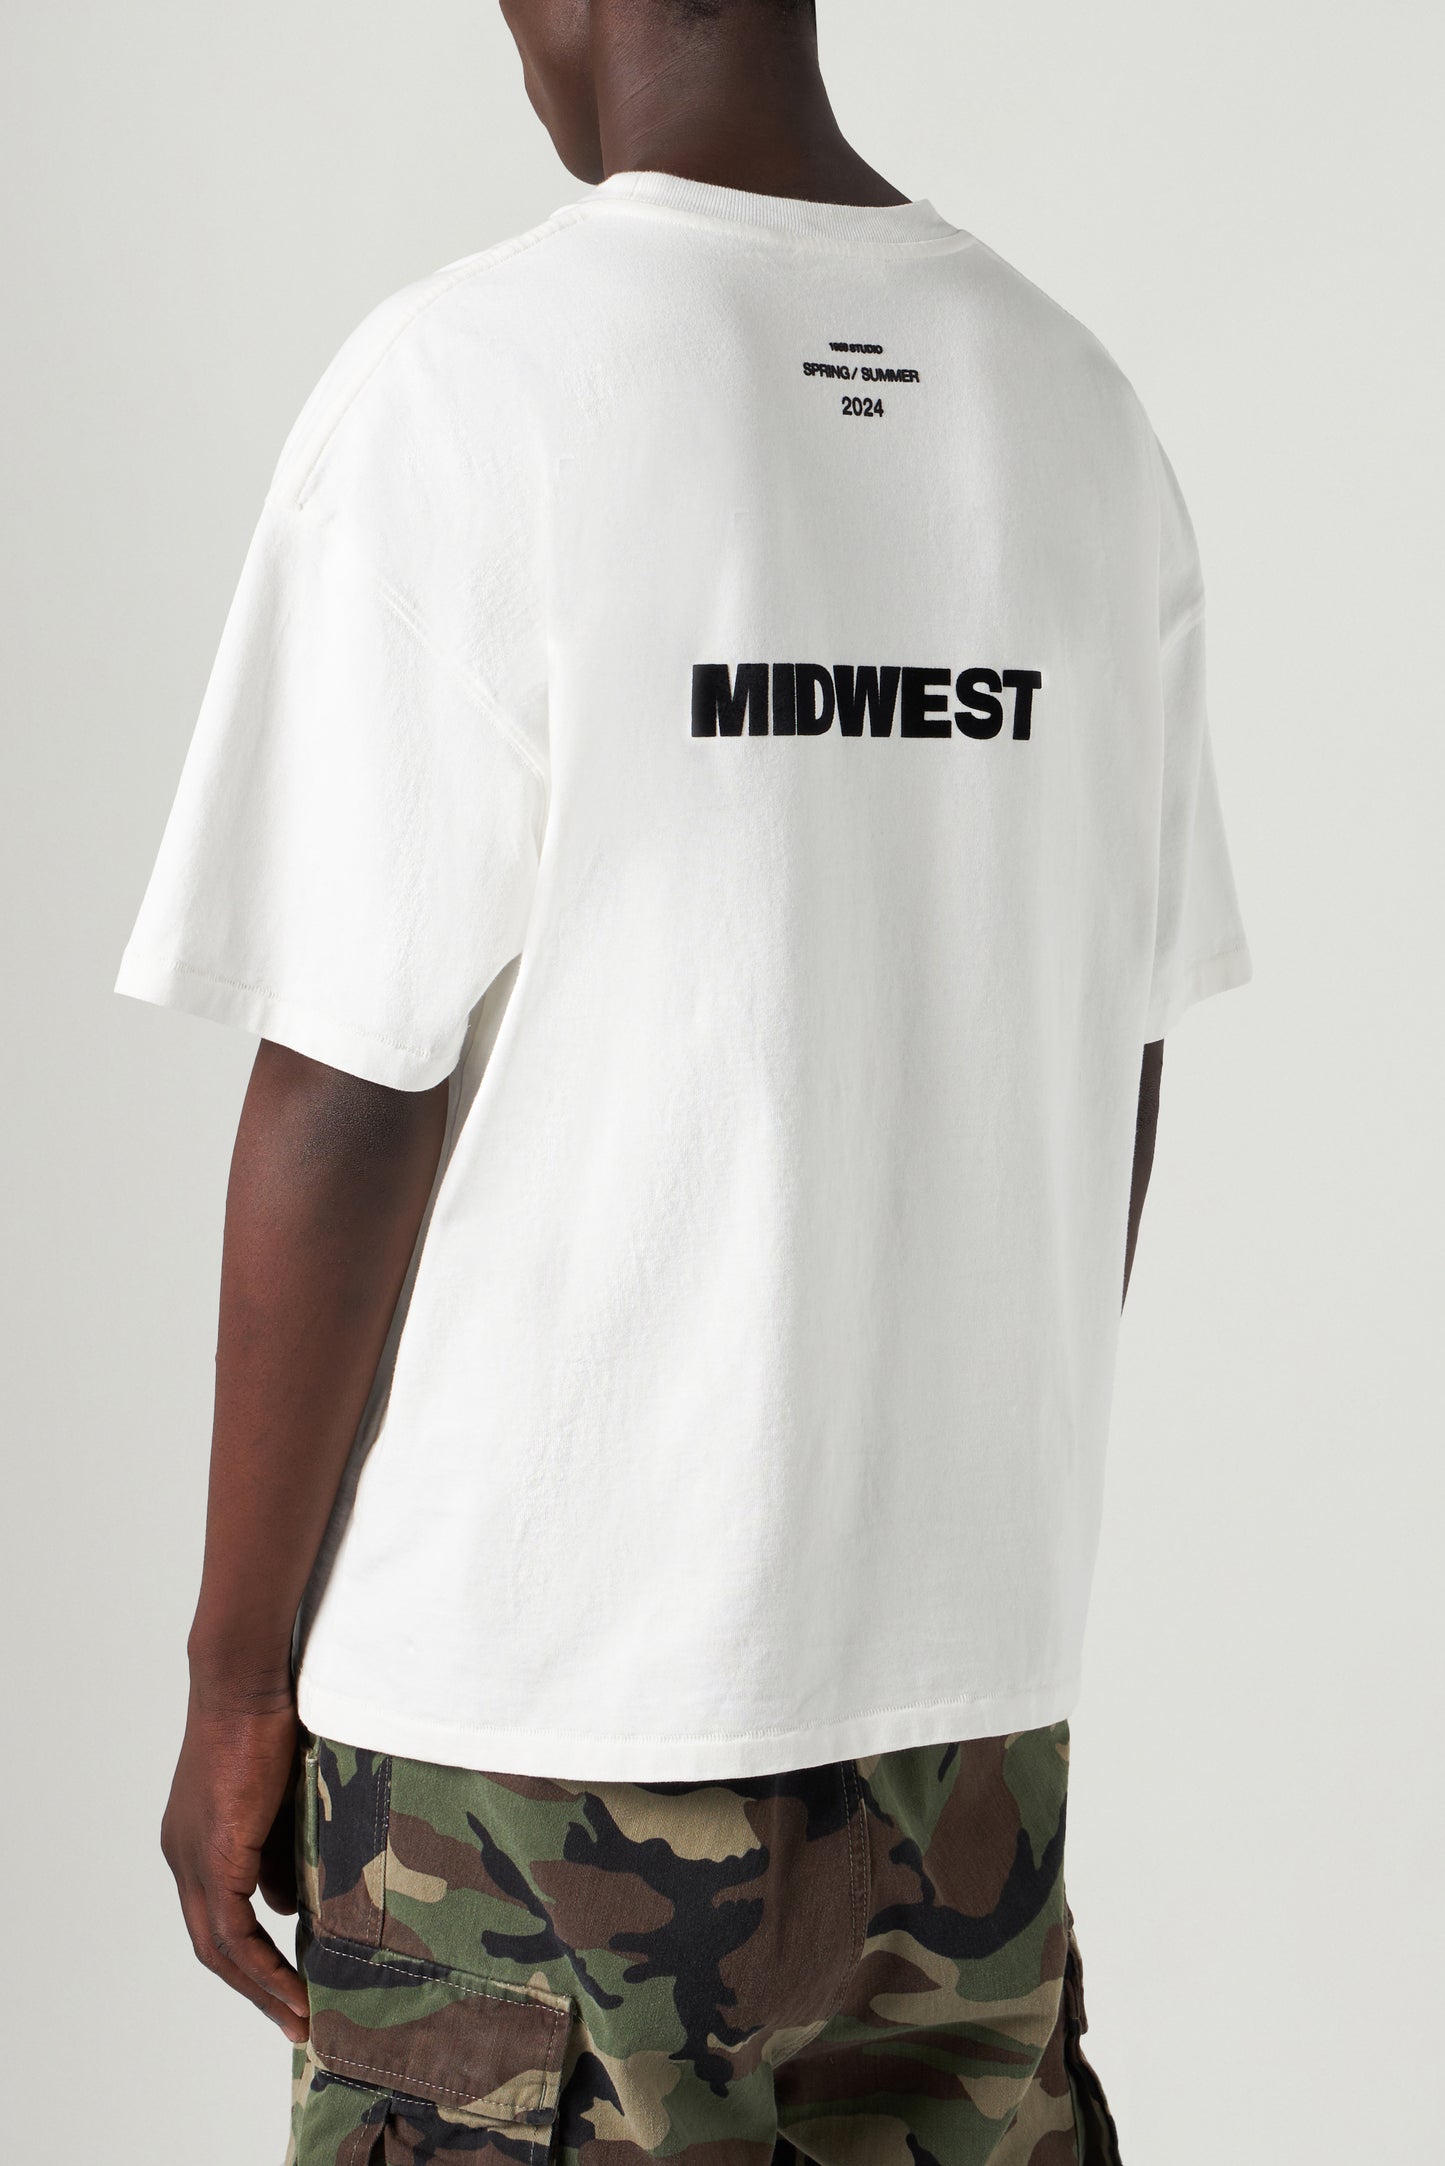 Man's Midwest T-Shirt